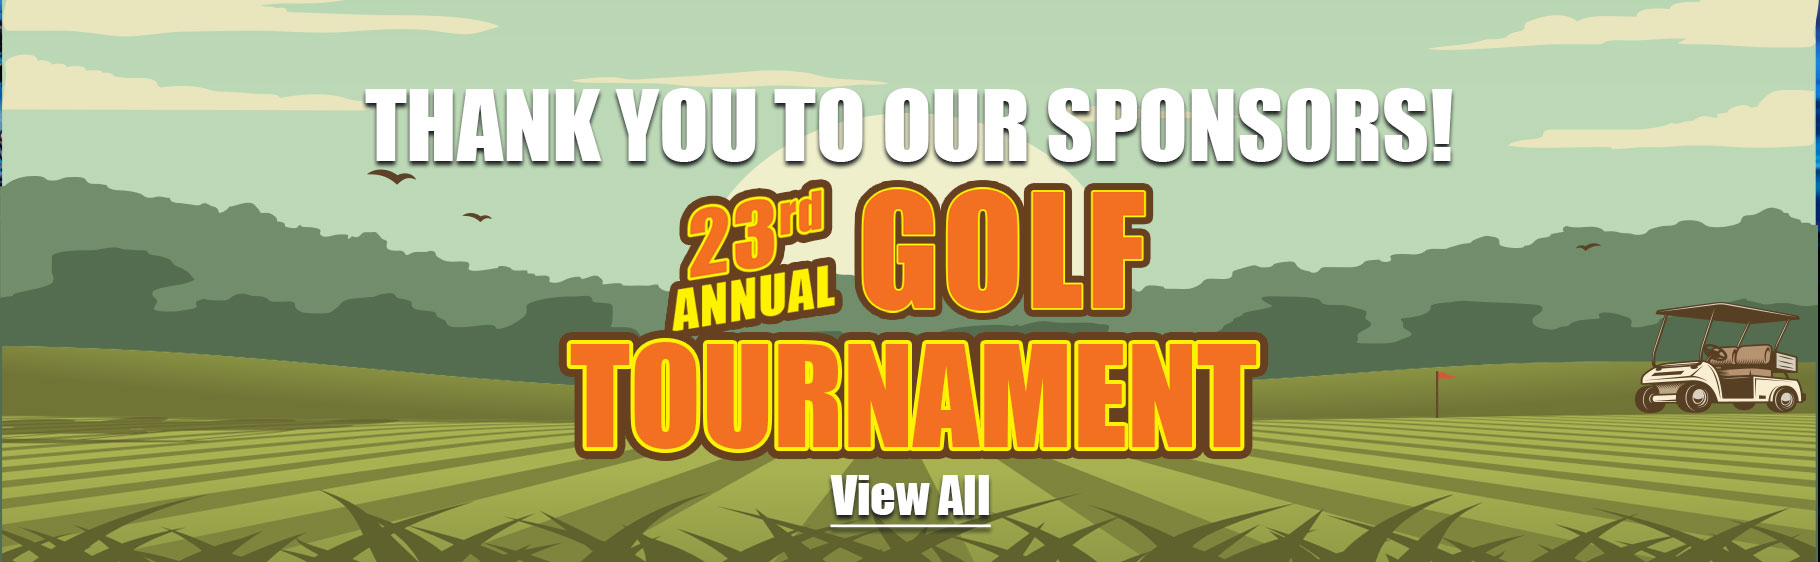 Thank you to our sponsors

23rd Annual Golf Tournament 

View all by clicking here